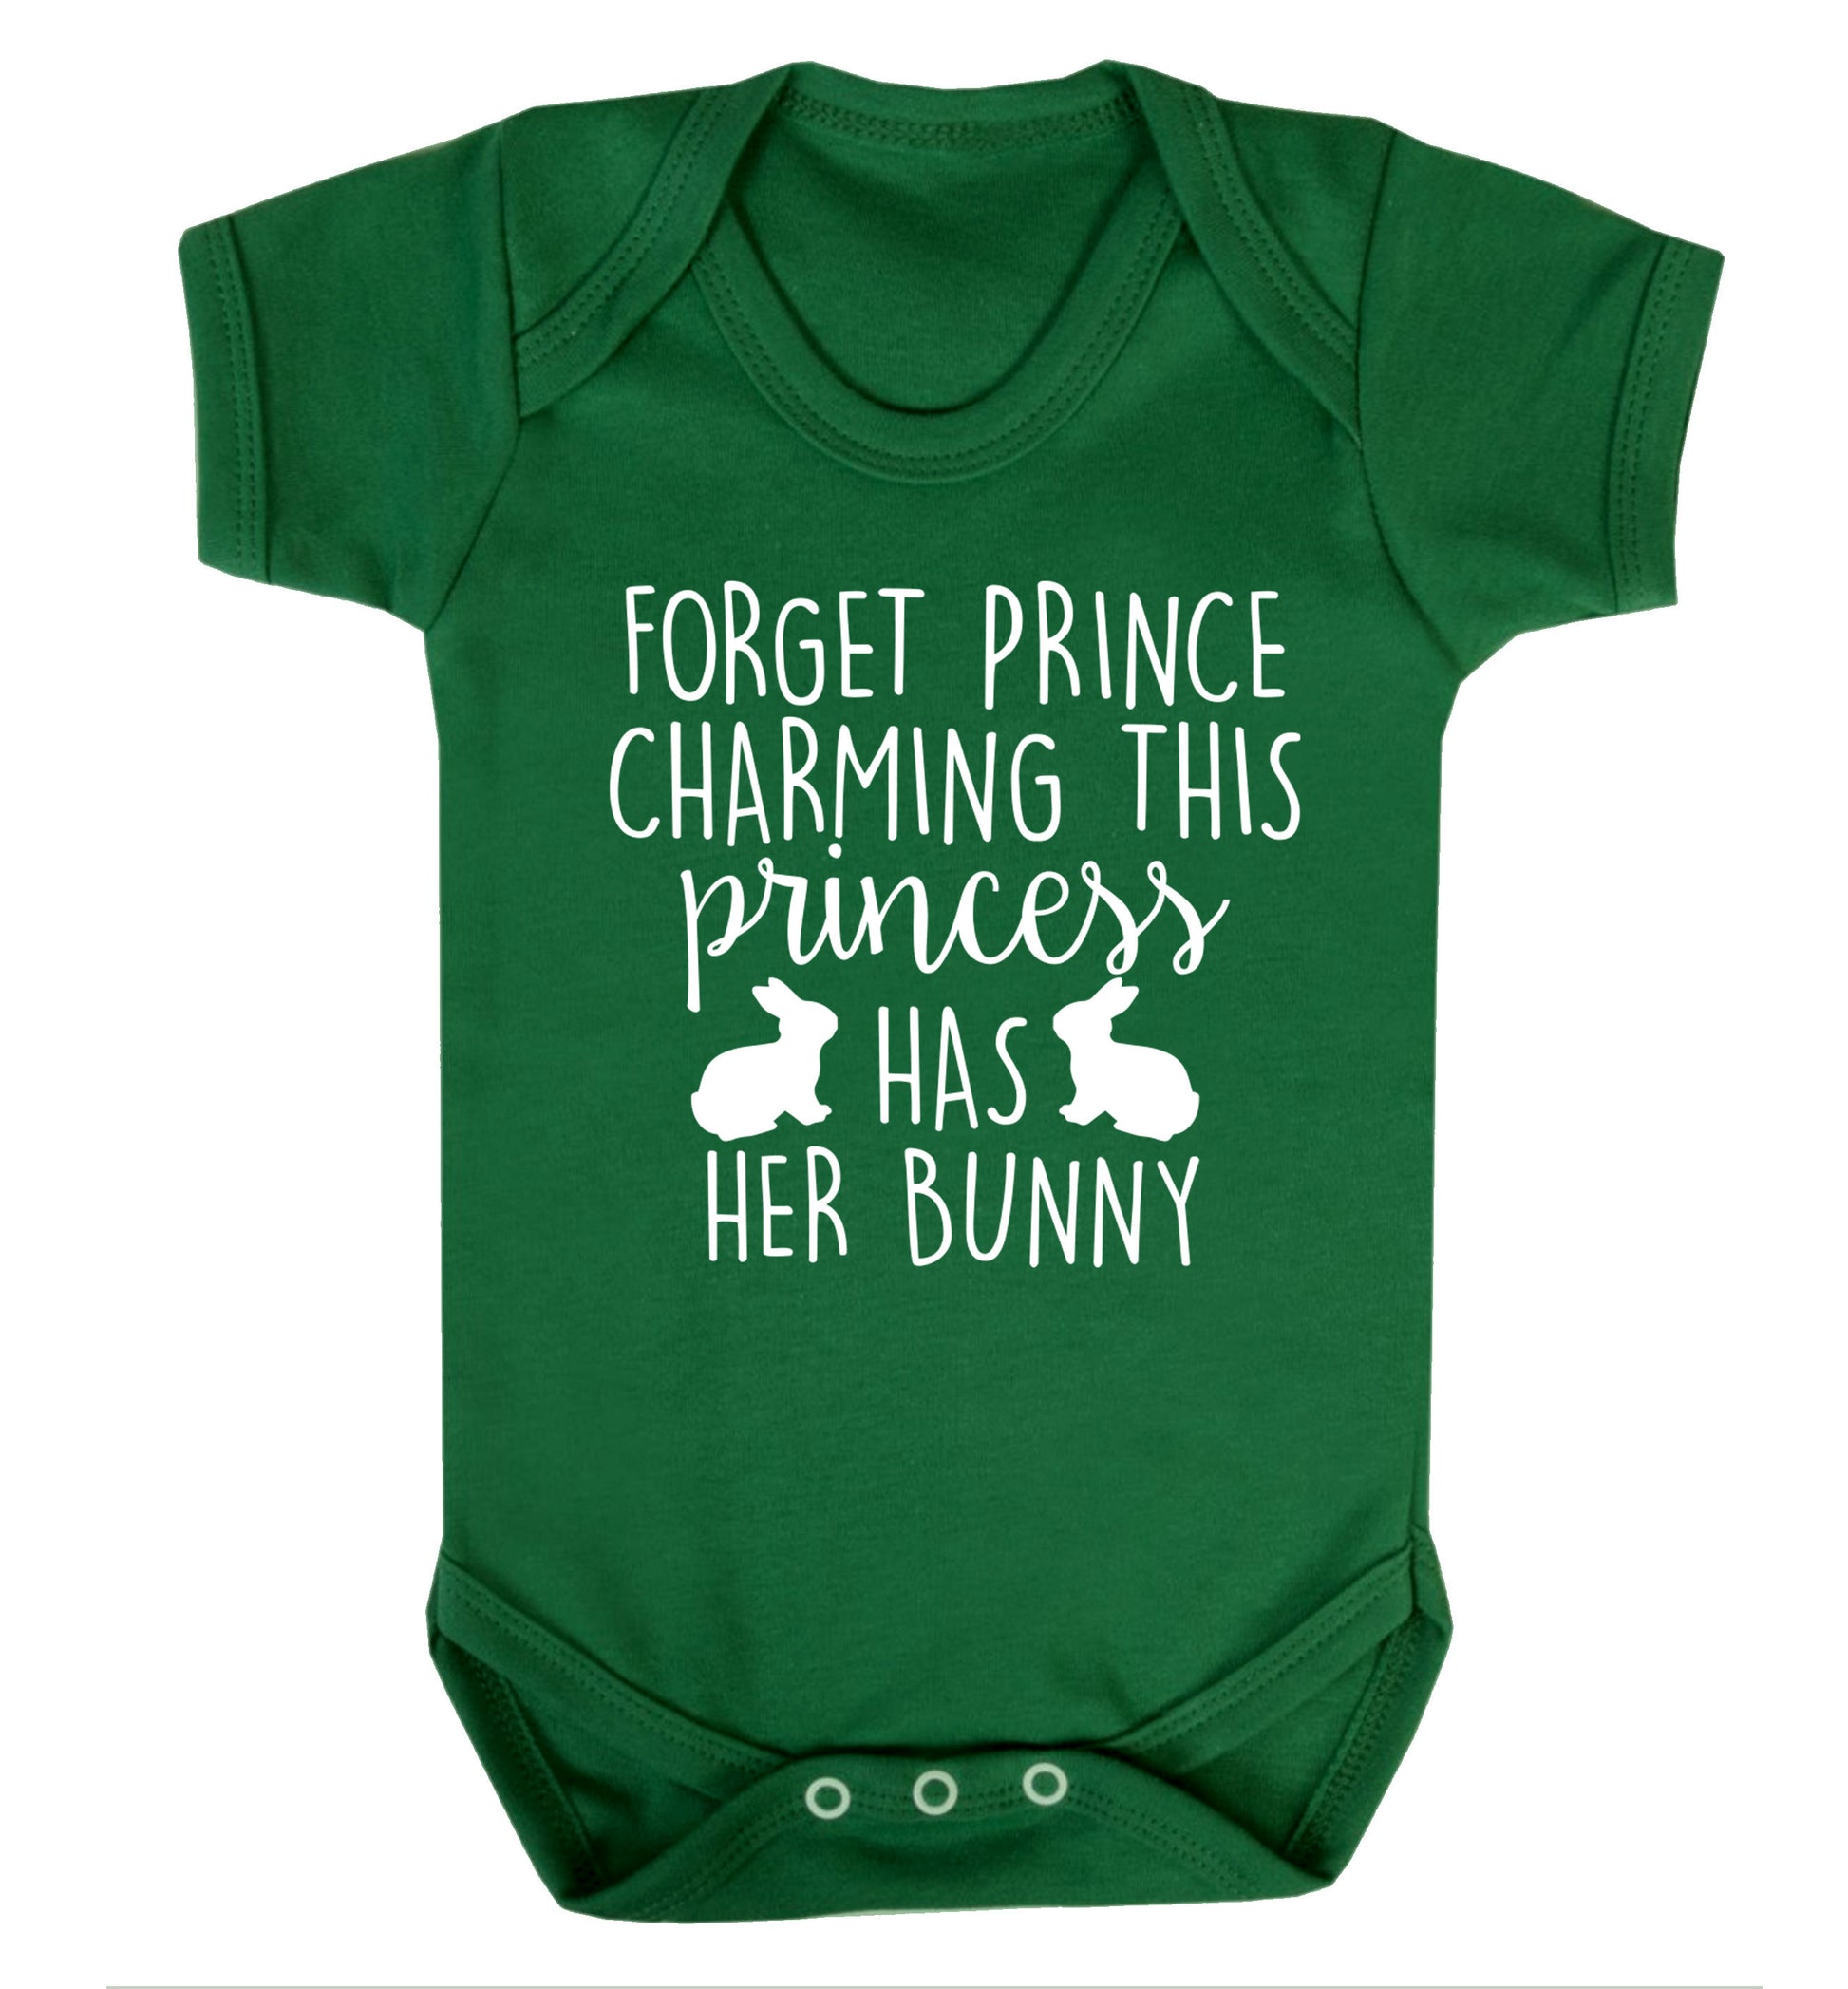 Forget prince charming this princess has her bunny Baby Vest green 18-24 months